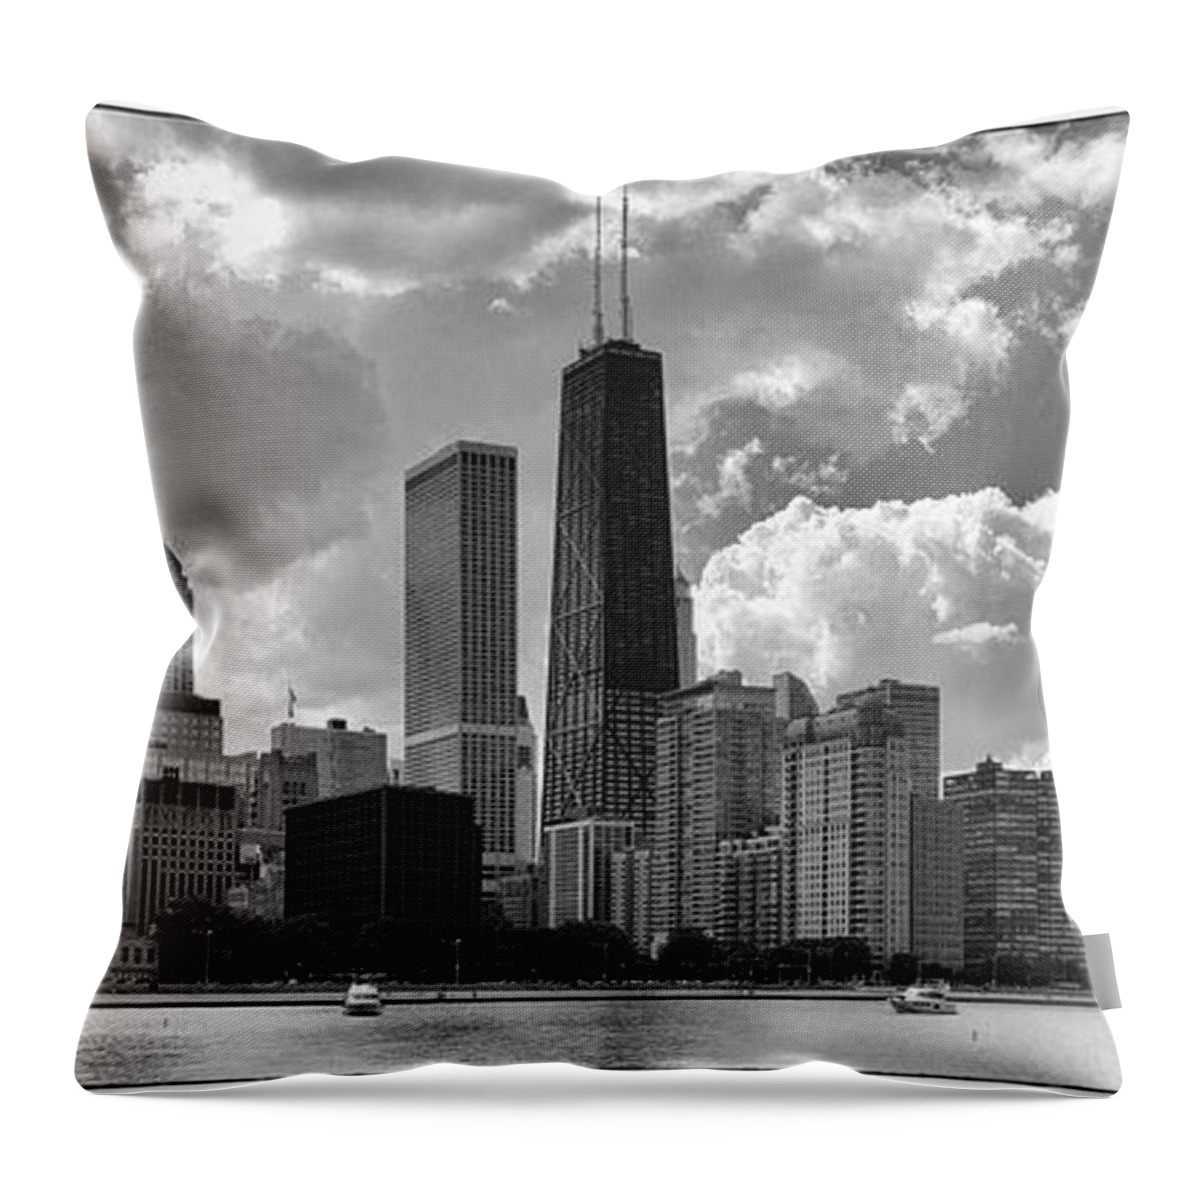 Chicago Throw Pillow featuring the photograph A Chicago Skyline by John Roach